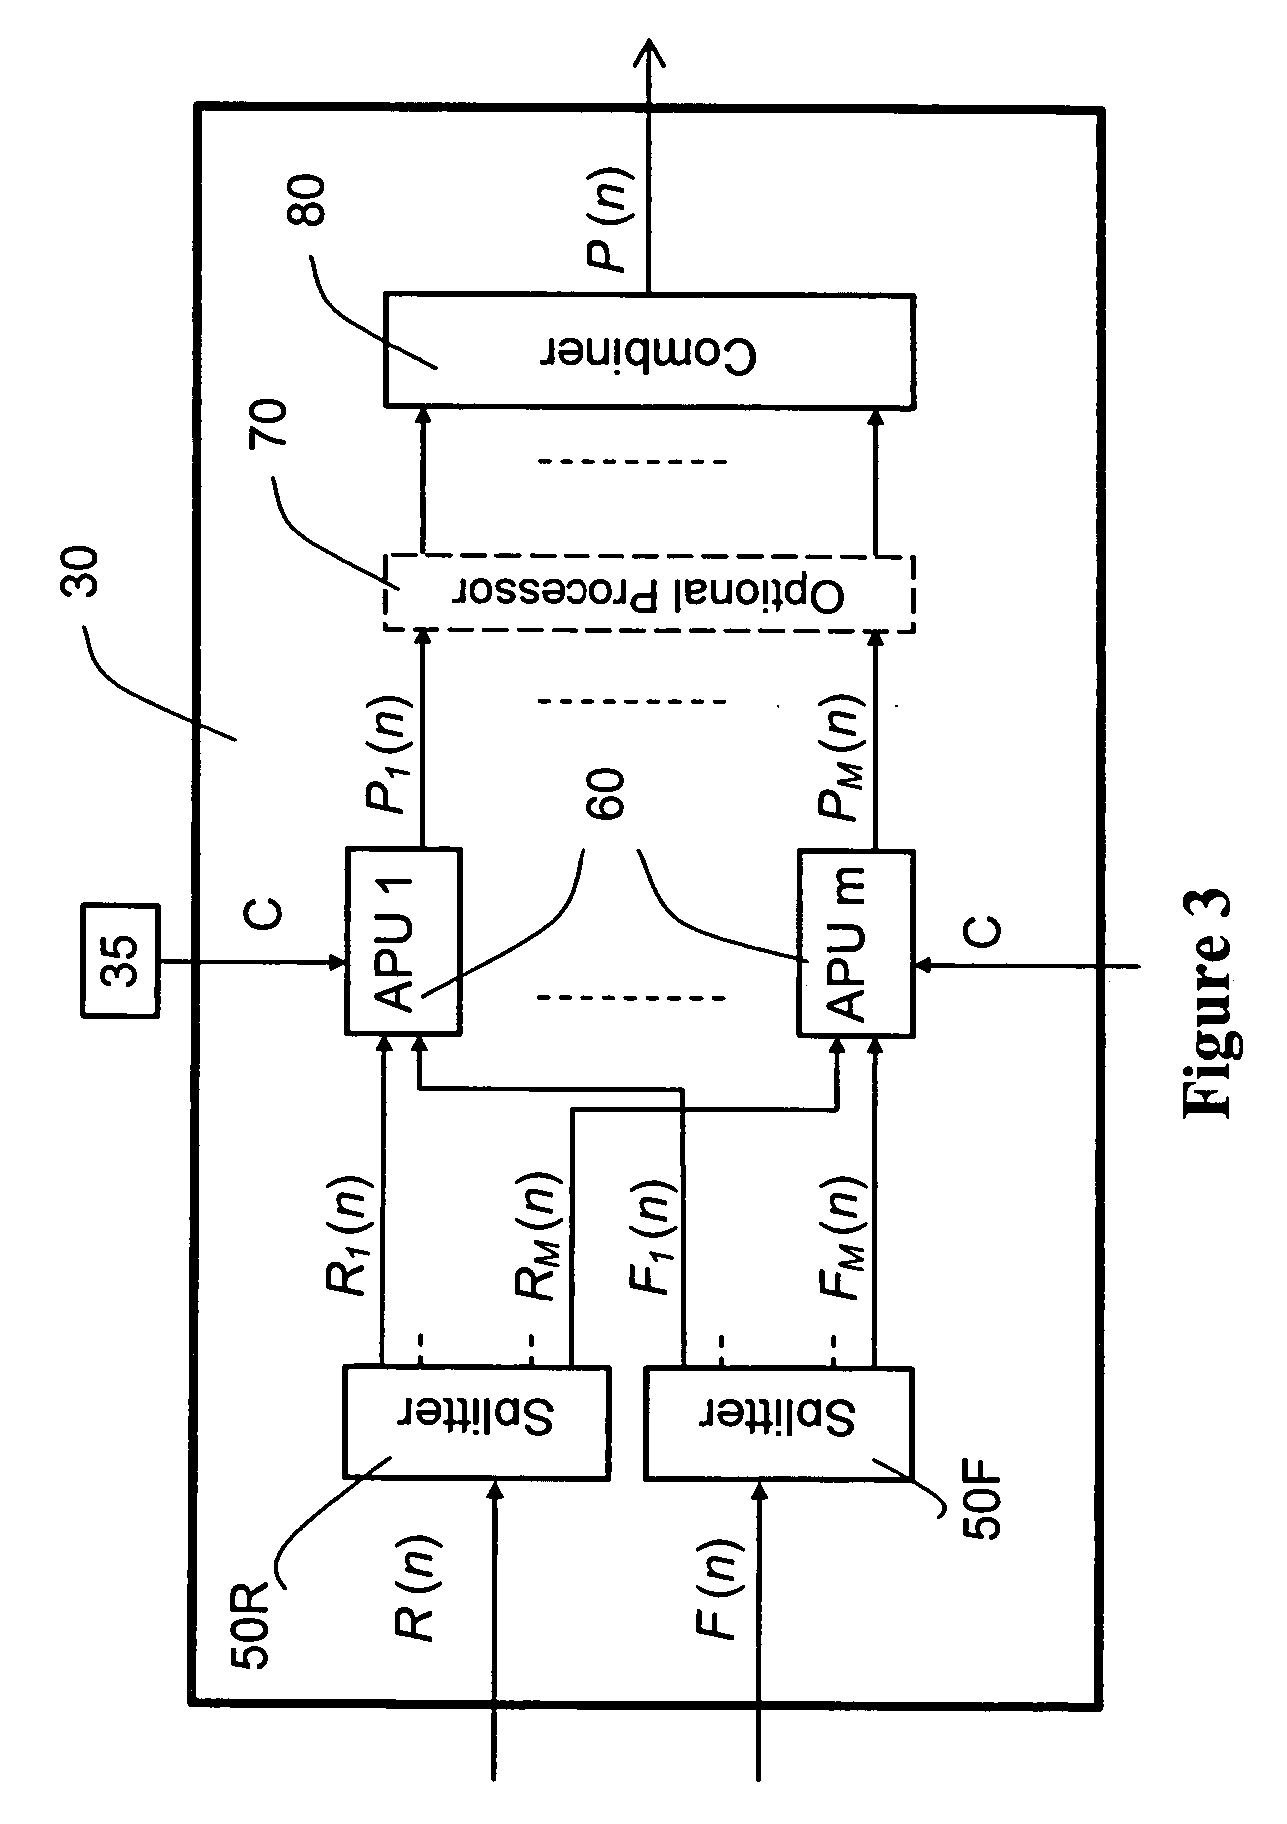 Method and system for reduction of noise in microphone signals